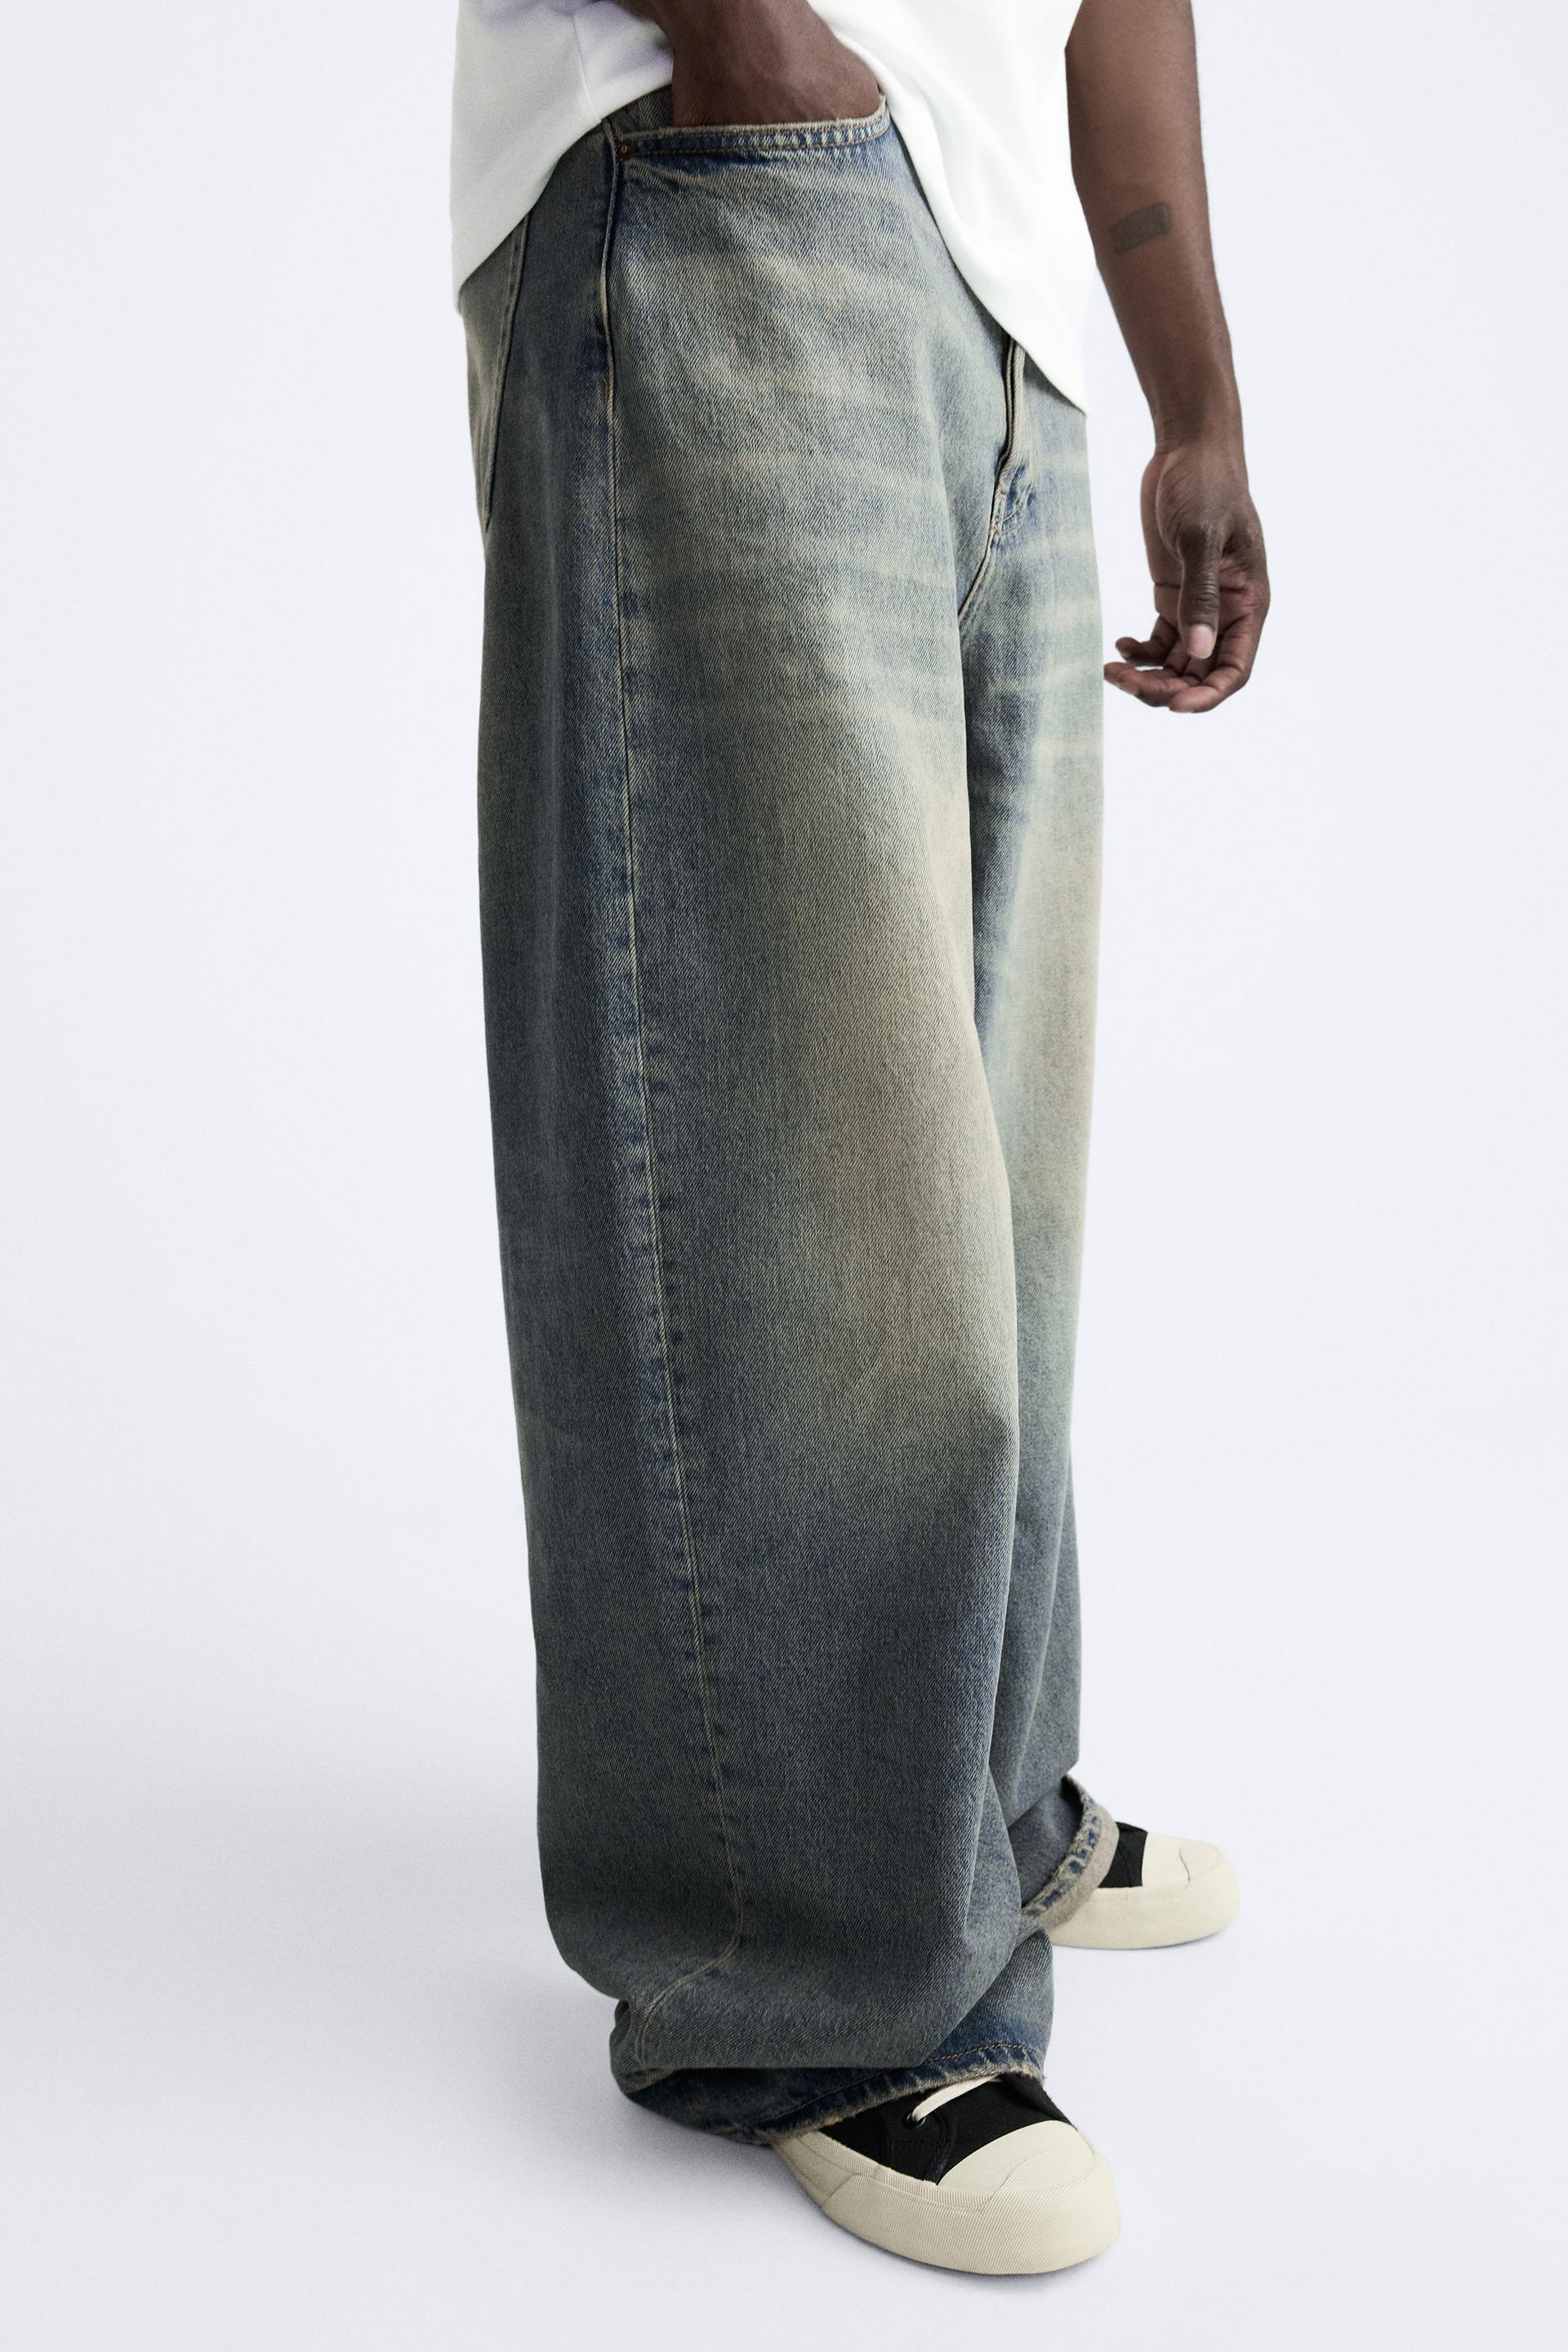 ZARA NEW MAN OVERDYED BAGGY JEANS PANT FADED SKY BLUE 3991/305